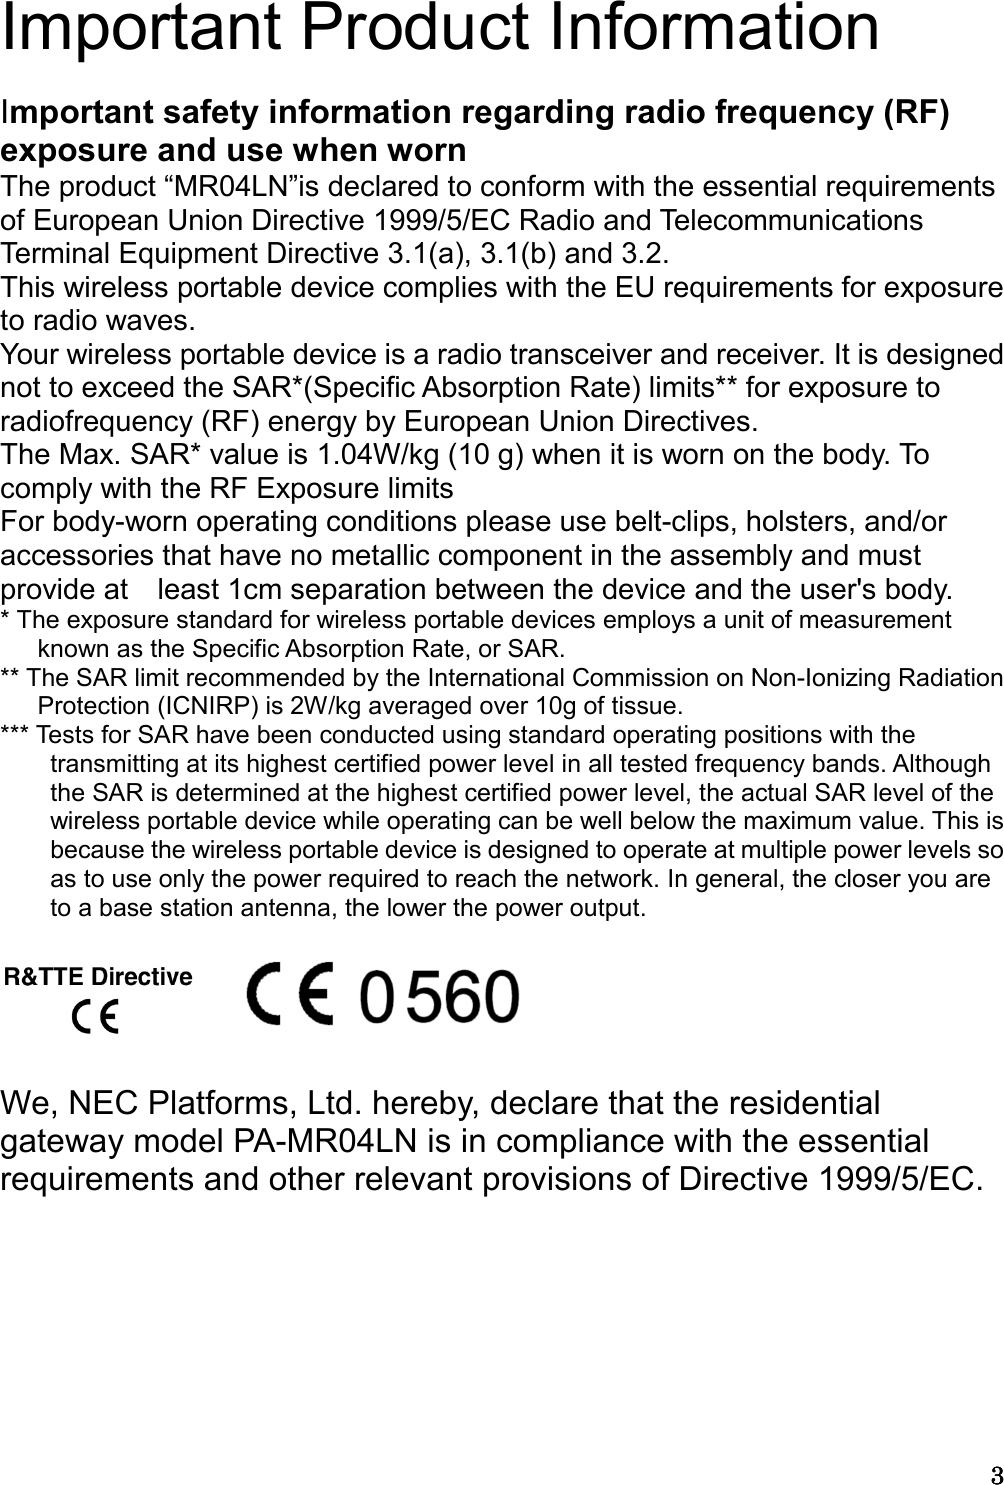 3333  Important Product Information  Important safety information regarding radio frequency (RF) exposure and use when worn The product “MR04LN”is declared to conform with the essential requirements of European Union Directive 1999/5/EC Radio and Telecommunications Terminal Equipment Directive 3.1(a), 3.1(b) and 3.2.   This wireless portable device complies with the EU requirements for exposure to radio waves. Your wireless portable device is a radio transceiver and receiver. It is designed not to exceed the SAR*(Specific Absorption Rate) limits** for exposure to radiofrequency (RF) energy by European Union Directives. The Max. SAR* value is 1.04W/kg (10 g) when it is worn on the body. To comply with the RF Exposure limits For body-worn operating conditions please use belt-clips, holsters, and/or   accessories that have no metallic component in the assembly and must provide at    least 1cm separation between the device and the user&apos;s body. * The exposure standard for wireless portable devices employs a unit of measurement known as the Specific Absorption Rate, or SAR.   ** The SAR limit recommended by the International Commission on Non-Ionizing Radiation Protection (ICNIRP) is 2W/kg averaged over 10g of tissue.   *** Tests for SAR have been conducted using standard operating positions with the transmitting at its highest certified power level in all tested frequency bands. Although the SAR is determined at the highest certified power level, the actual SAR level of the wireless portable device while operating can be well below the maximum value. This is because the wireless portable device is designed to operate at multiple power levels so as to use only the power required to reach the network. In general, the closer you are to a base station antenna, the lower the power output.       We, NEC Platforms, Ltd. hereby, declare that the residential gateway model PA-MR04LN is in compliance with the essential requirements and other relevant provisions of Directive 1999/5/EC.       